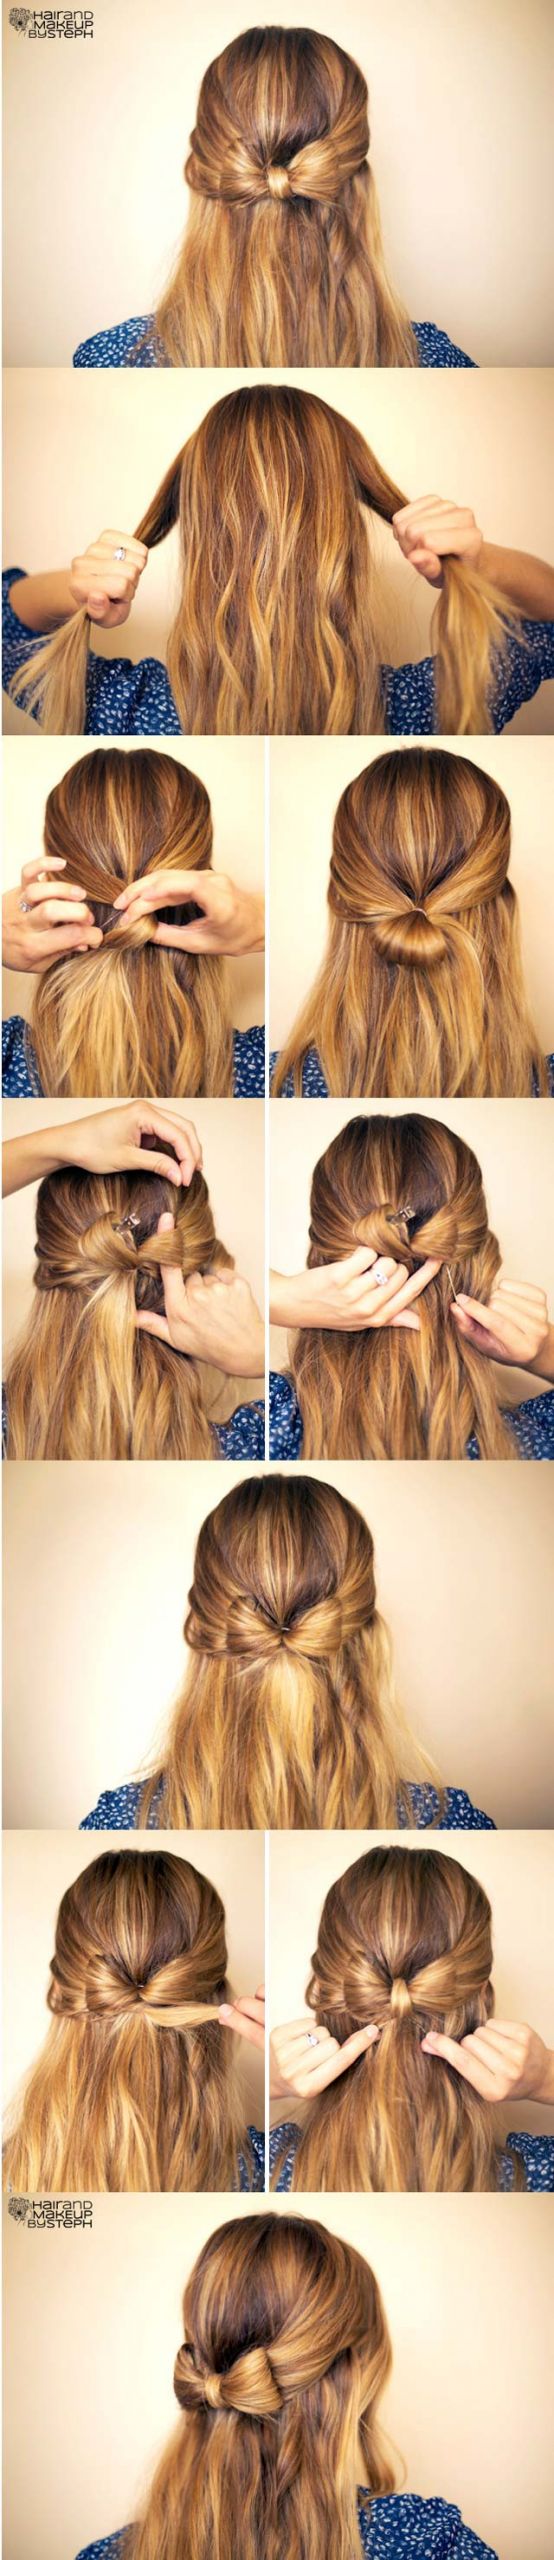 Cute Diy Hairstyles
 DIY Your Step by Step for the Best Cute Hairstyles